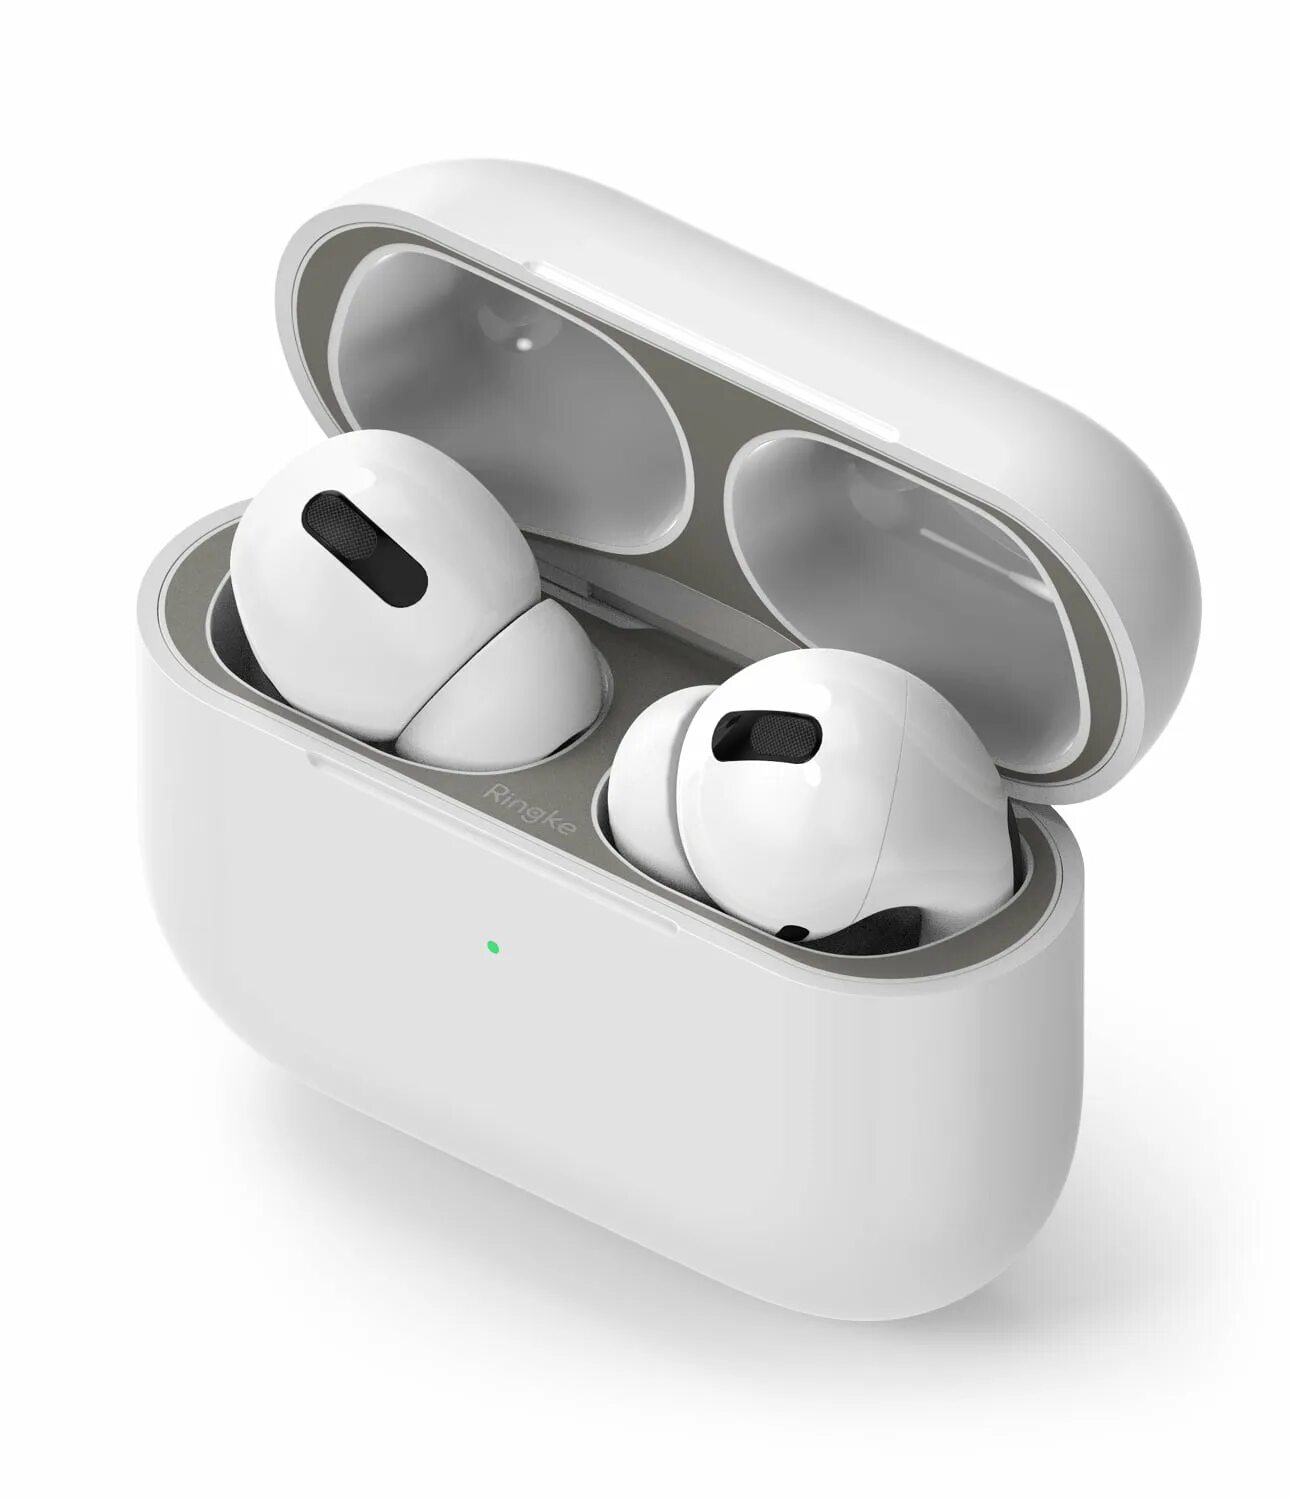 A2564 airpods. Apple AIRPODS Pro. A2565 AIRPODS. Наушники аирподс про 4. AIRPODS 3 a2565.